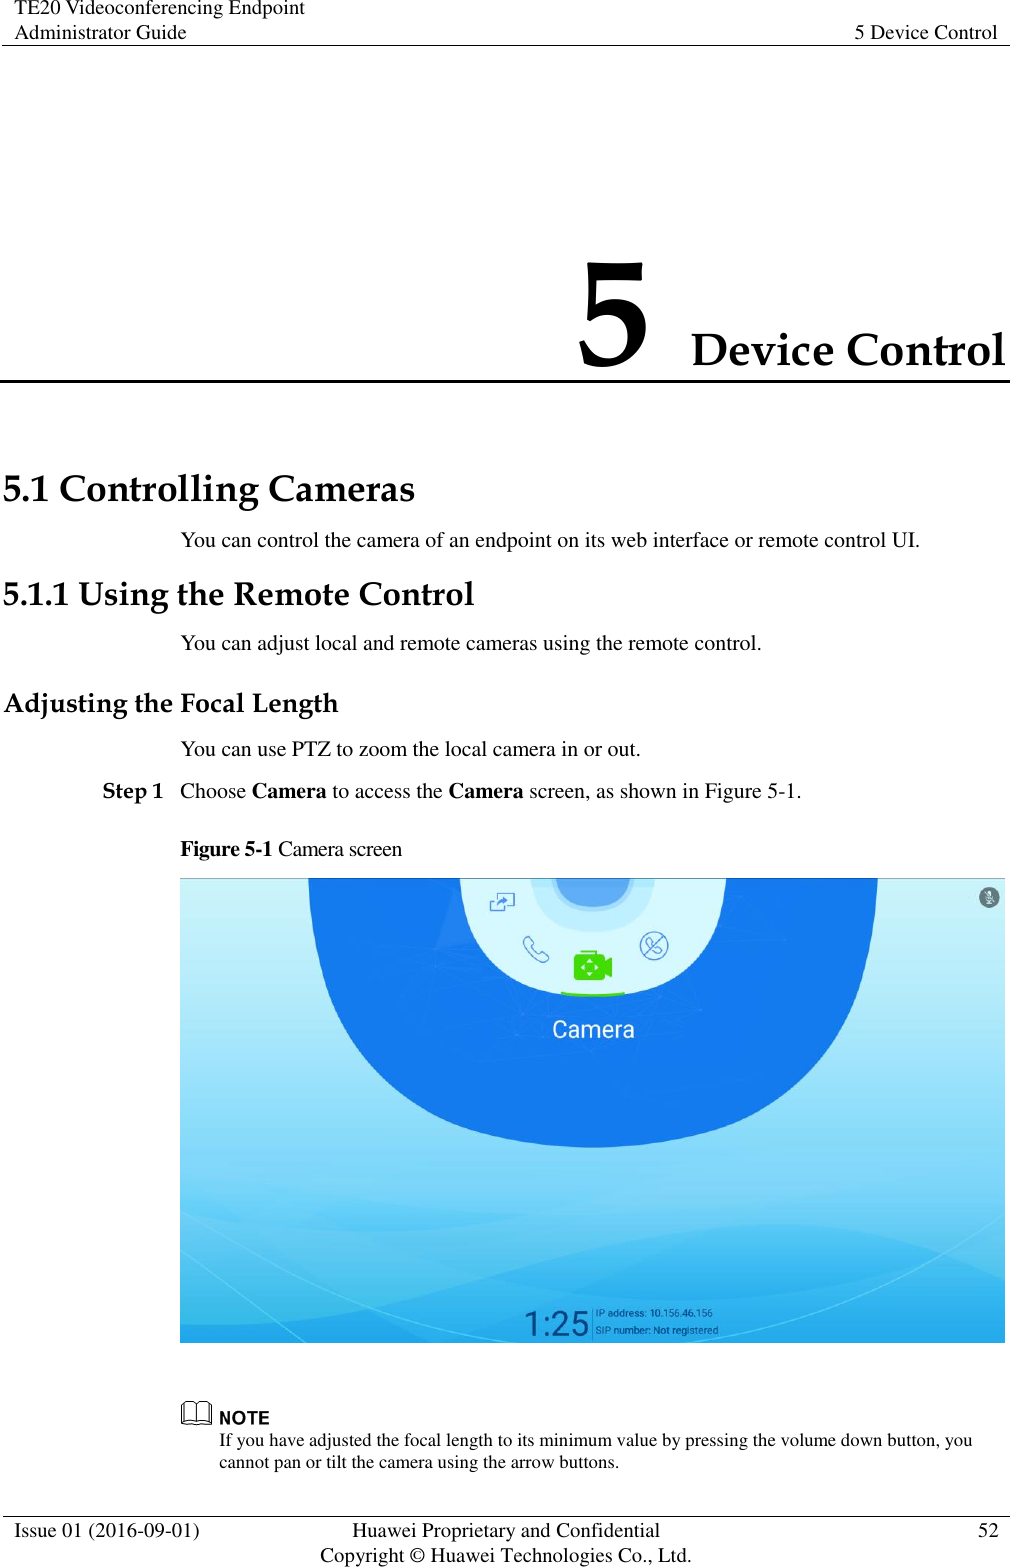 TE20 Videoconferencing Endpoint Administrator Guide 5 Device Control  Issue 01 (2016-09-01) Huawei Proprietary and Confidential                                     Copyright © Huawei Technologies Co., Ltd. 52  5 Device Control 5.1 Controlling Cameras You can control the camera of an endpoint on its web interface or remote control UI. 5.1.1 Using the Remote Control You can adjust local and remote cameras using the remote control. Adjusting the Focal Length You can use PTZ to zoom the local camera in or out. Step 1 Choose Camera to access the Camera screen, as shown in Figure 5-1. Figure 5-1 Camera screen    If you have adjusted the focal length to its minimum value by pressing the volume down button, you cannot pan or tilt the camera using the arrow buttons.   